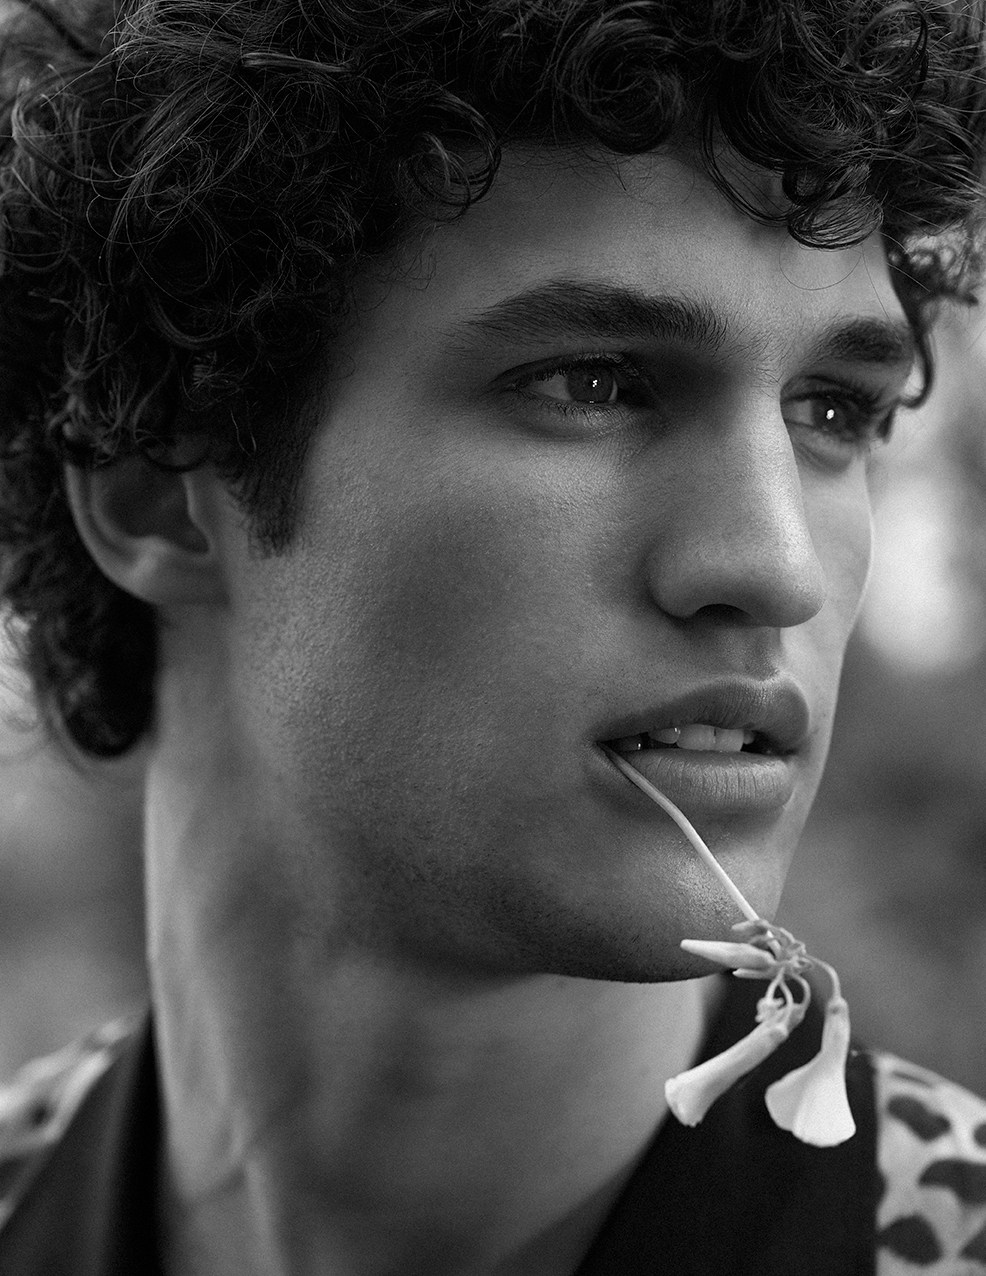 FRANCISCO HENRIQUES PHOTOGRAPHED BY FREDERICO MARTINS FOR RISBEL ...